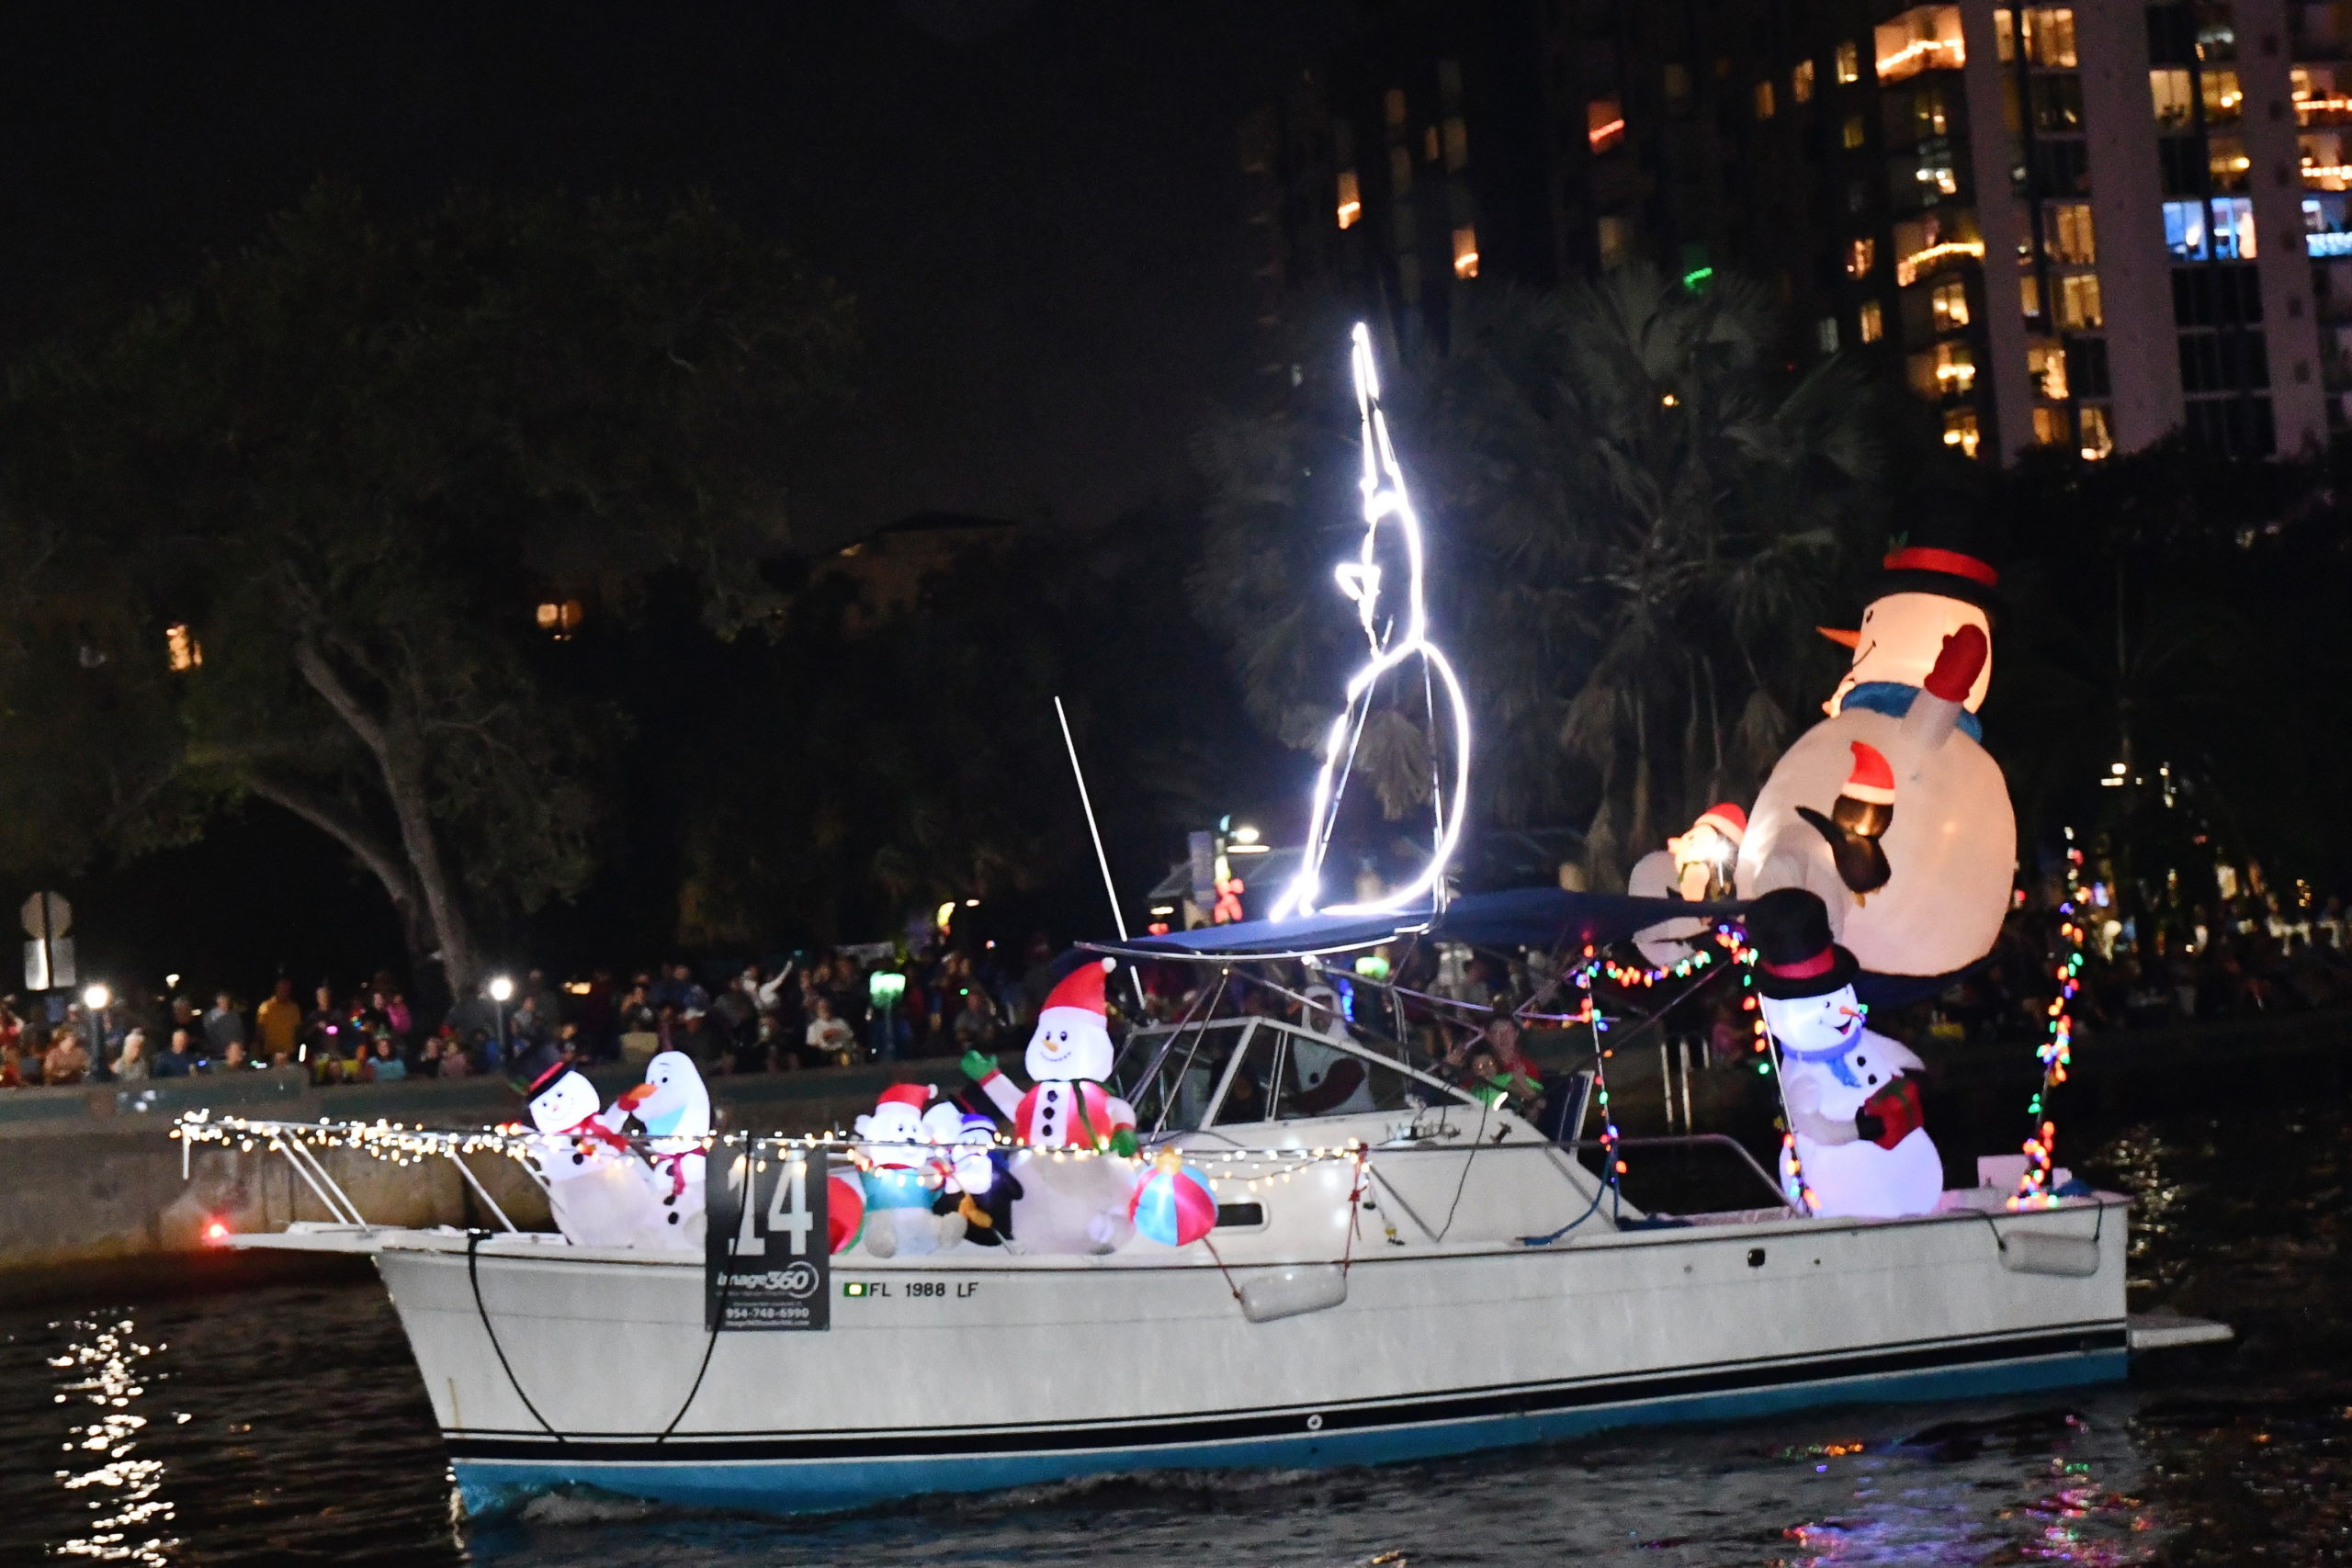 Dunn Deal, boat number 14 in the 2022 Winterfest Boat Parade